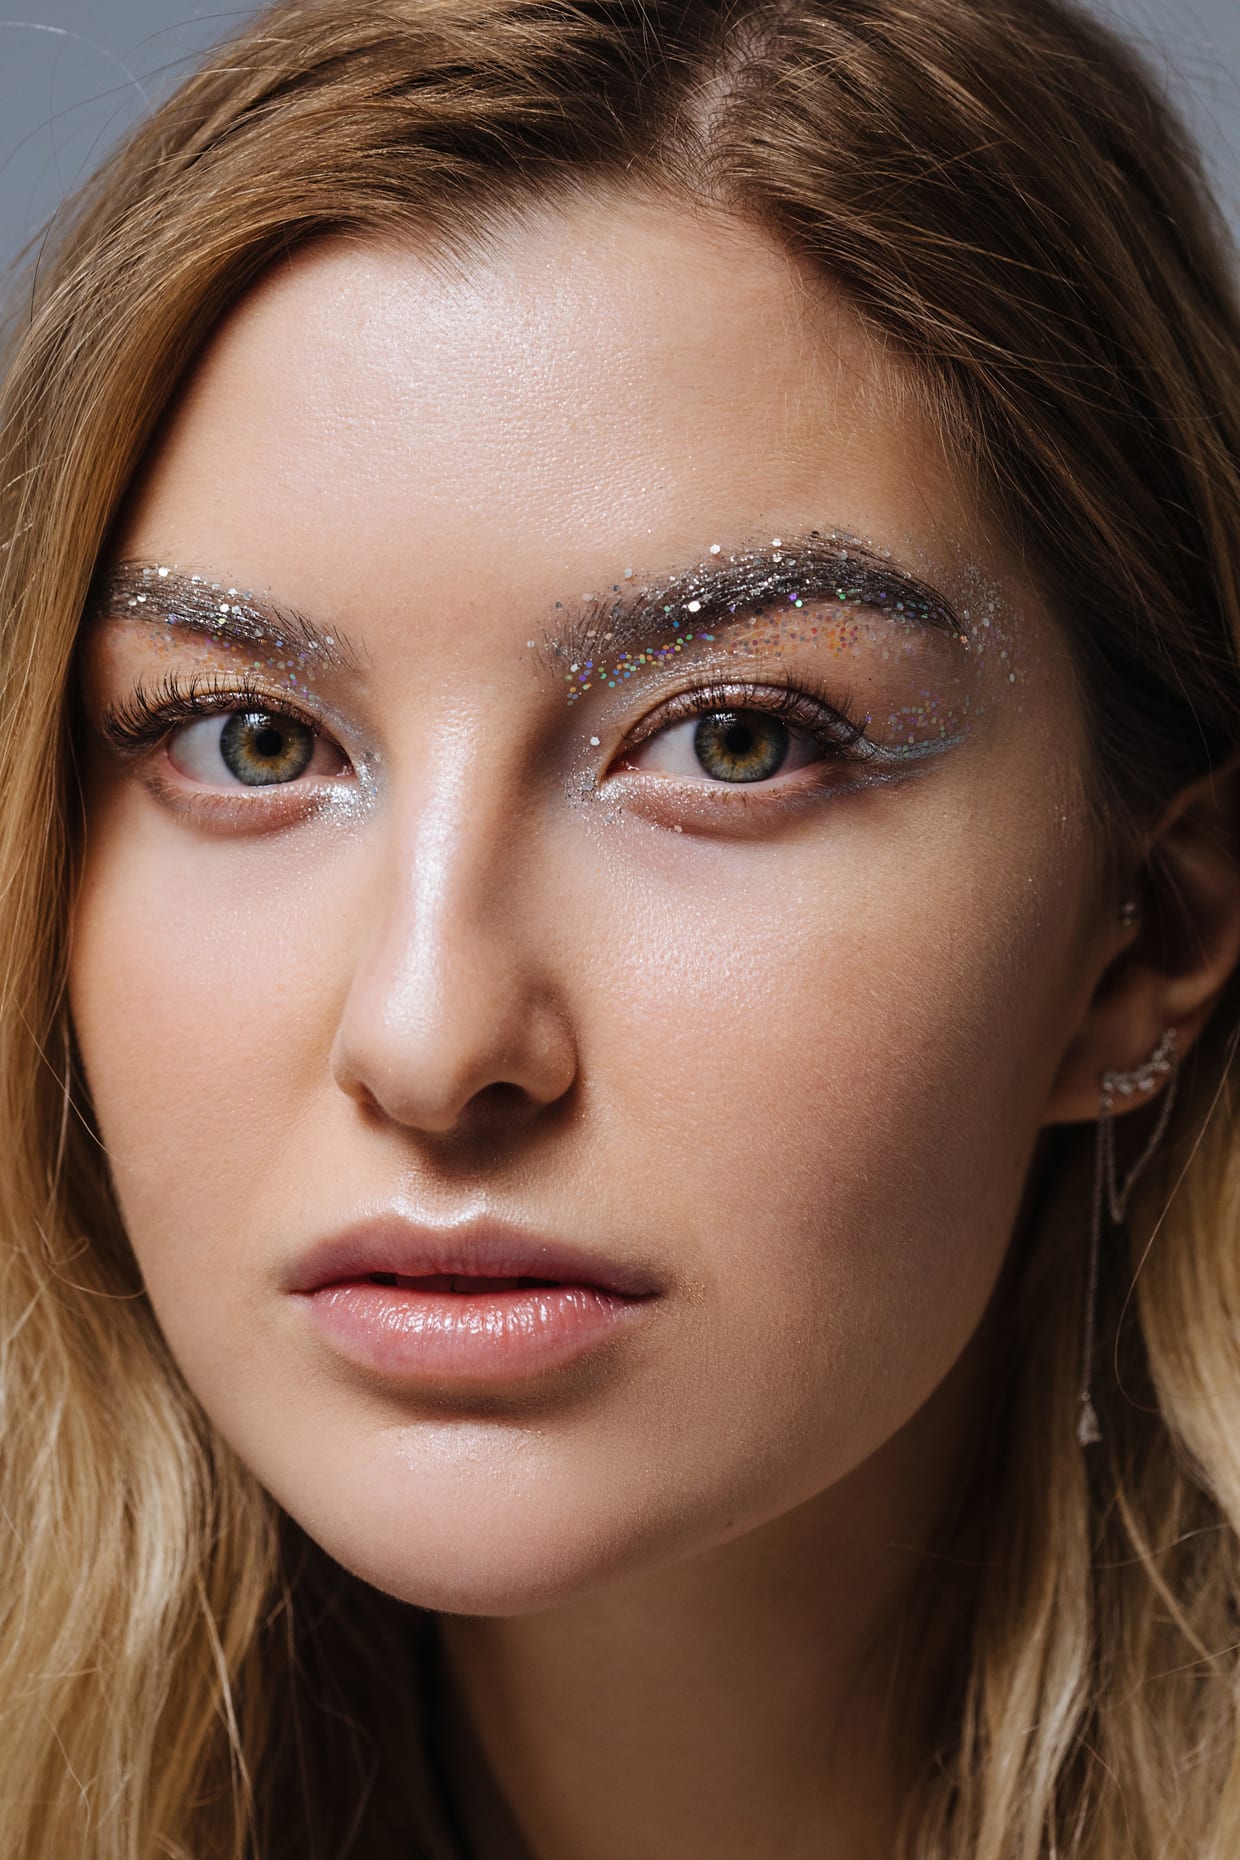 How glitter eye makeup can look incredible on mature women